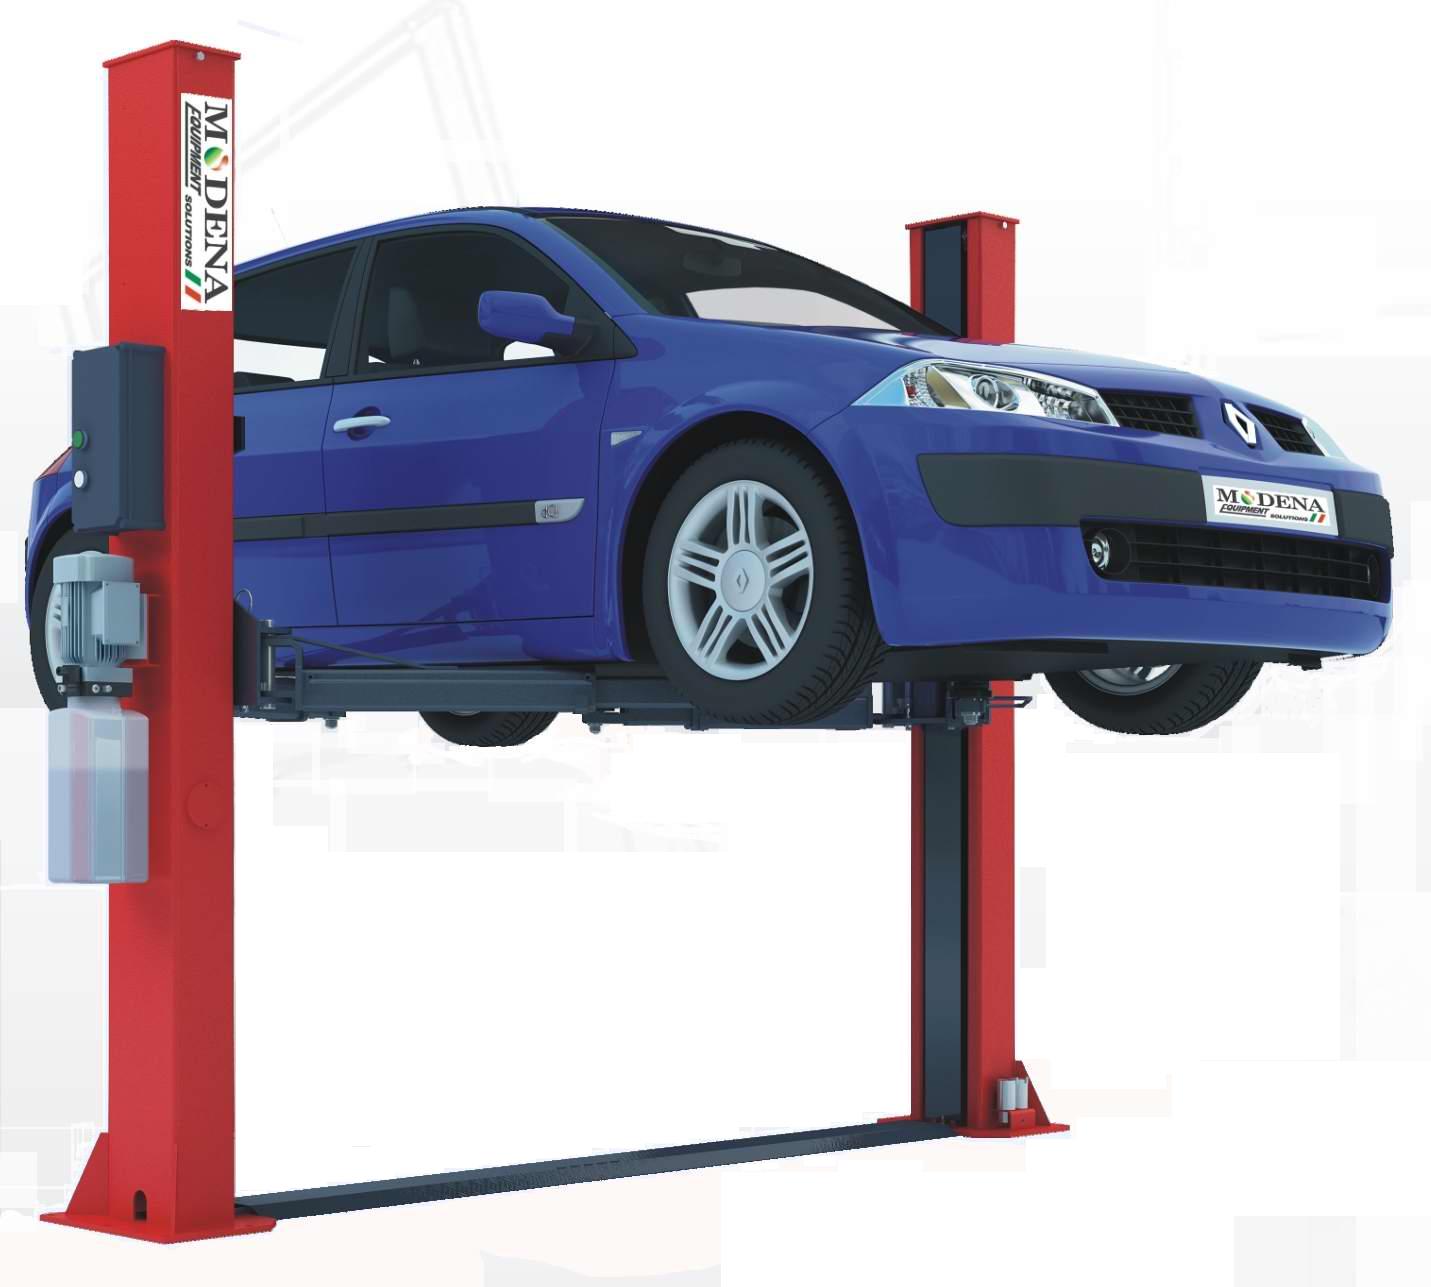 2 Post lift 4 tonne - manual safety